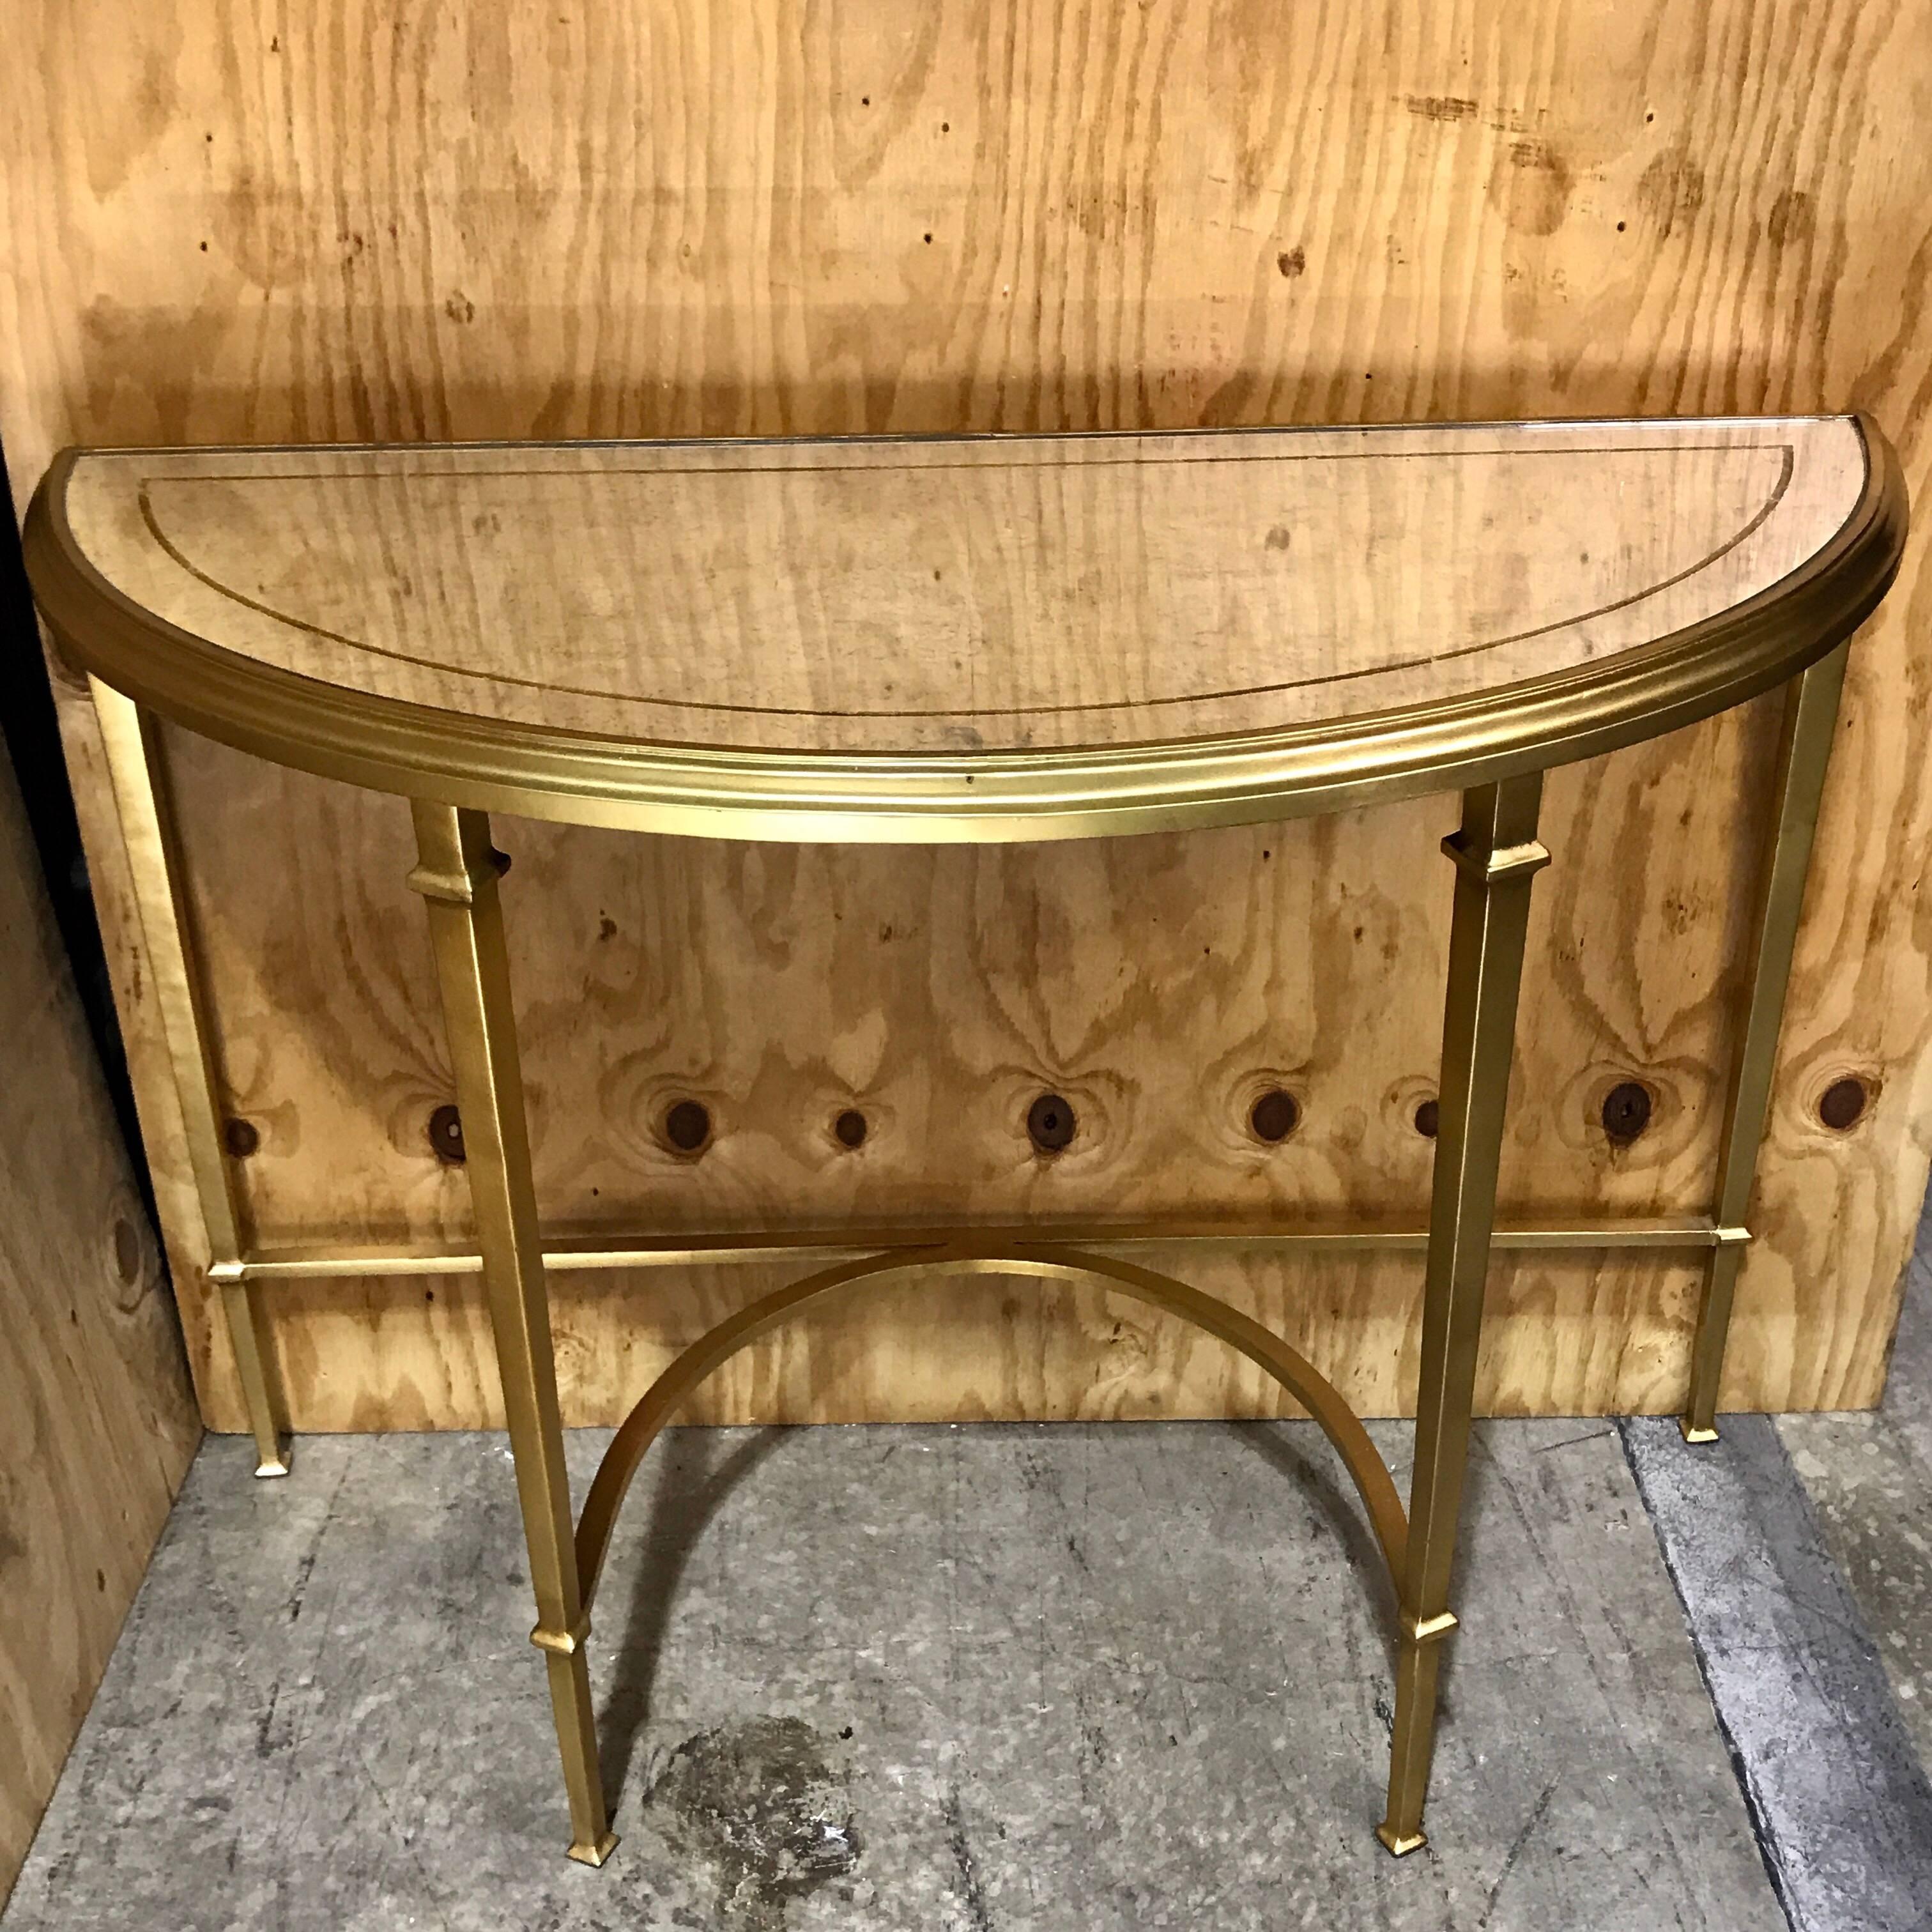 Modern gilt bronze and églomisé mirrored console table, exquisite casting and form, with half moon mirrored and gilt inset top raised on a conforming base with tapering column legs joined by a 